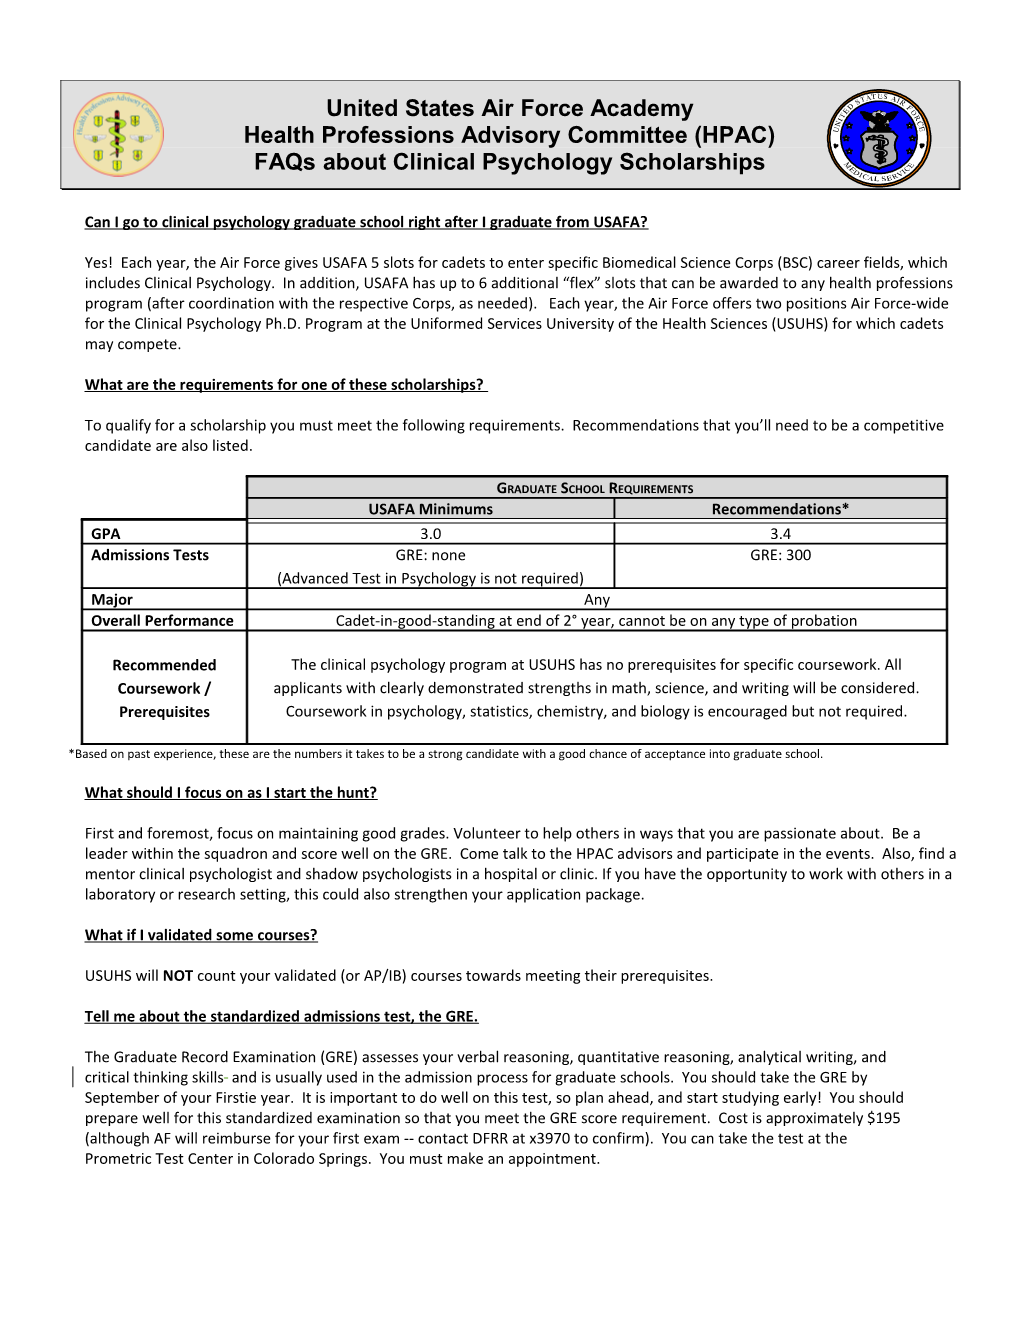 FAQS on Going to Medical and Dental School After USAFA